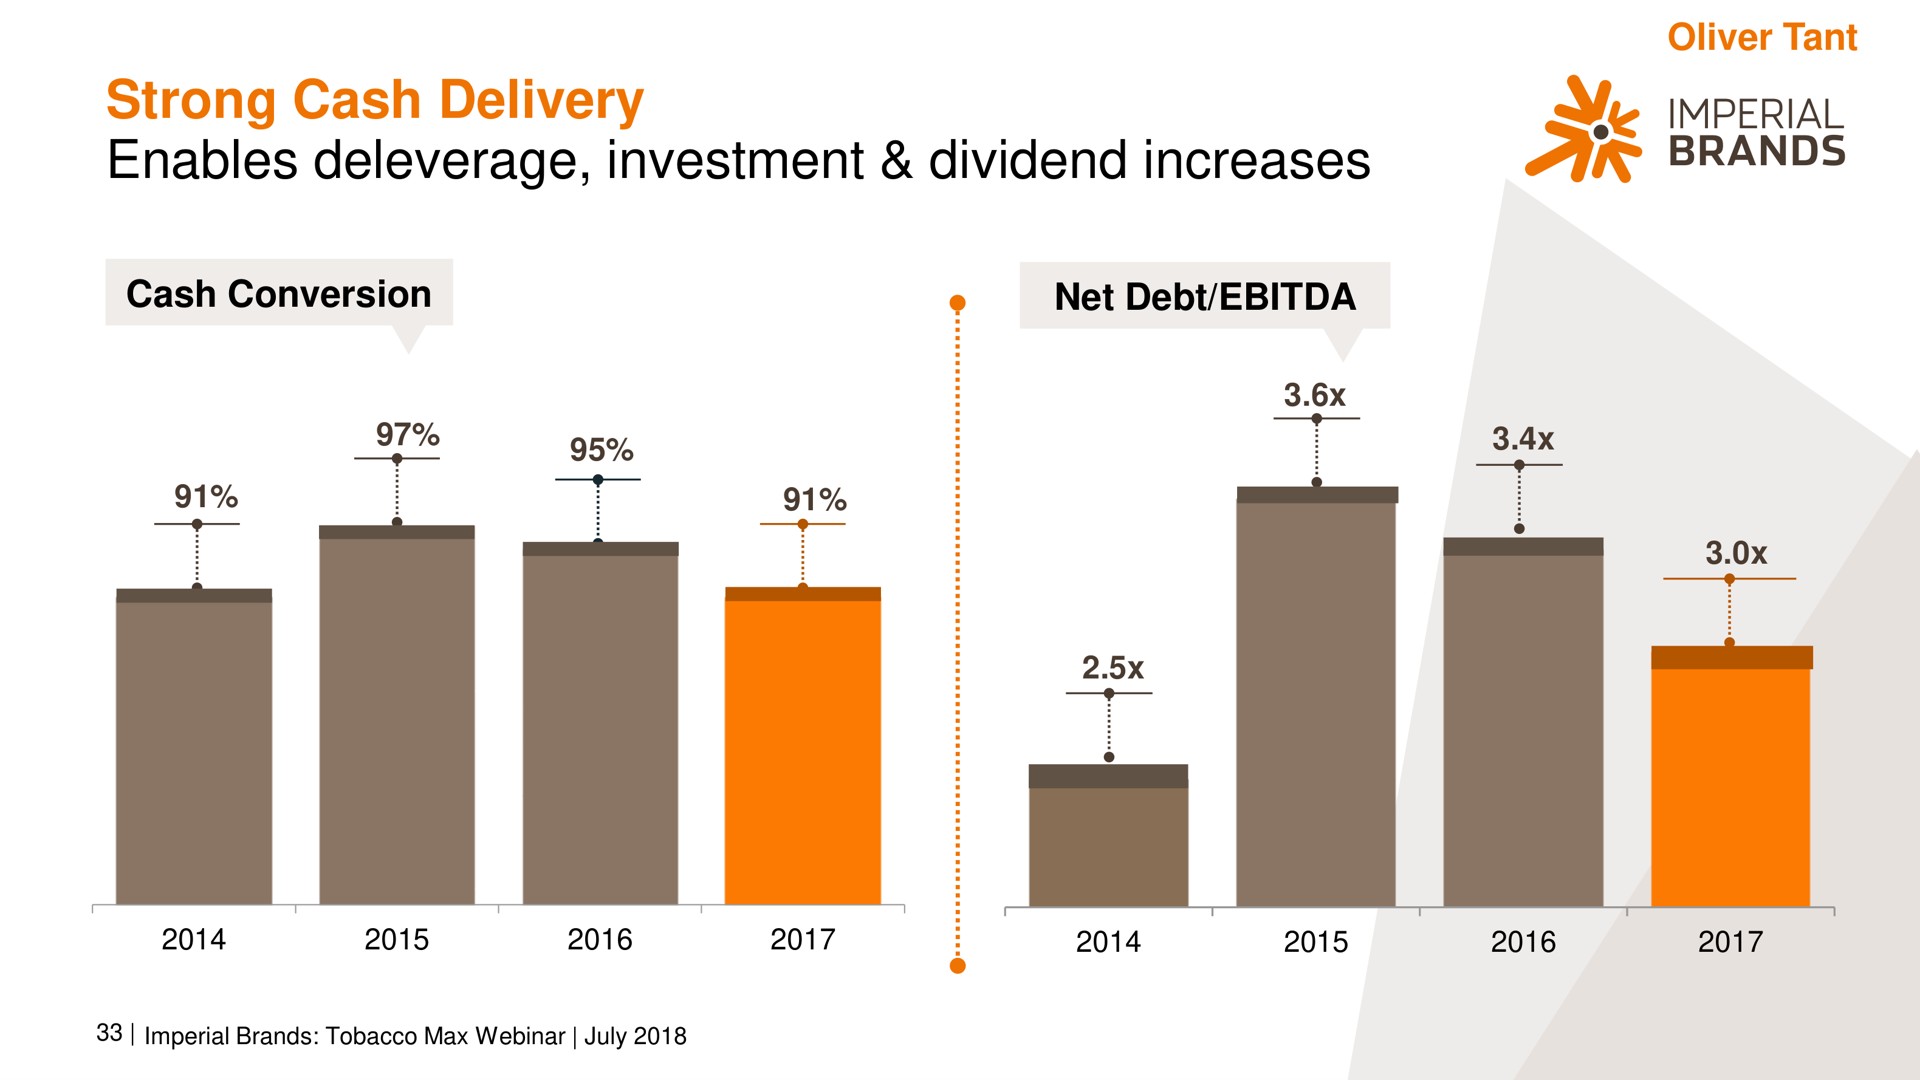 strong cash delivery enables investment dividend increases me imperial an brands | Imperial Brands